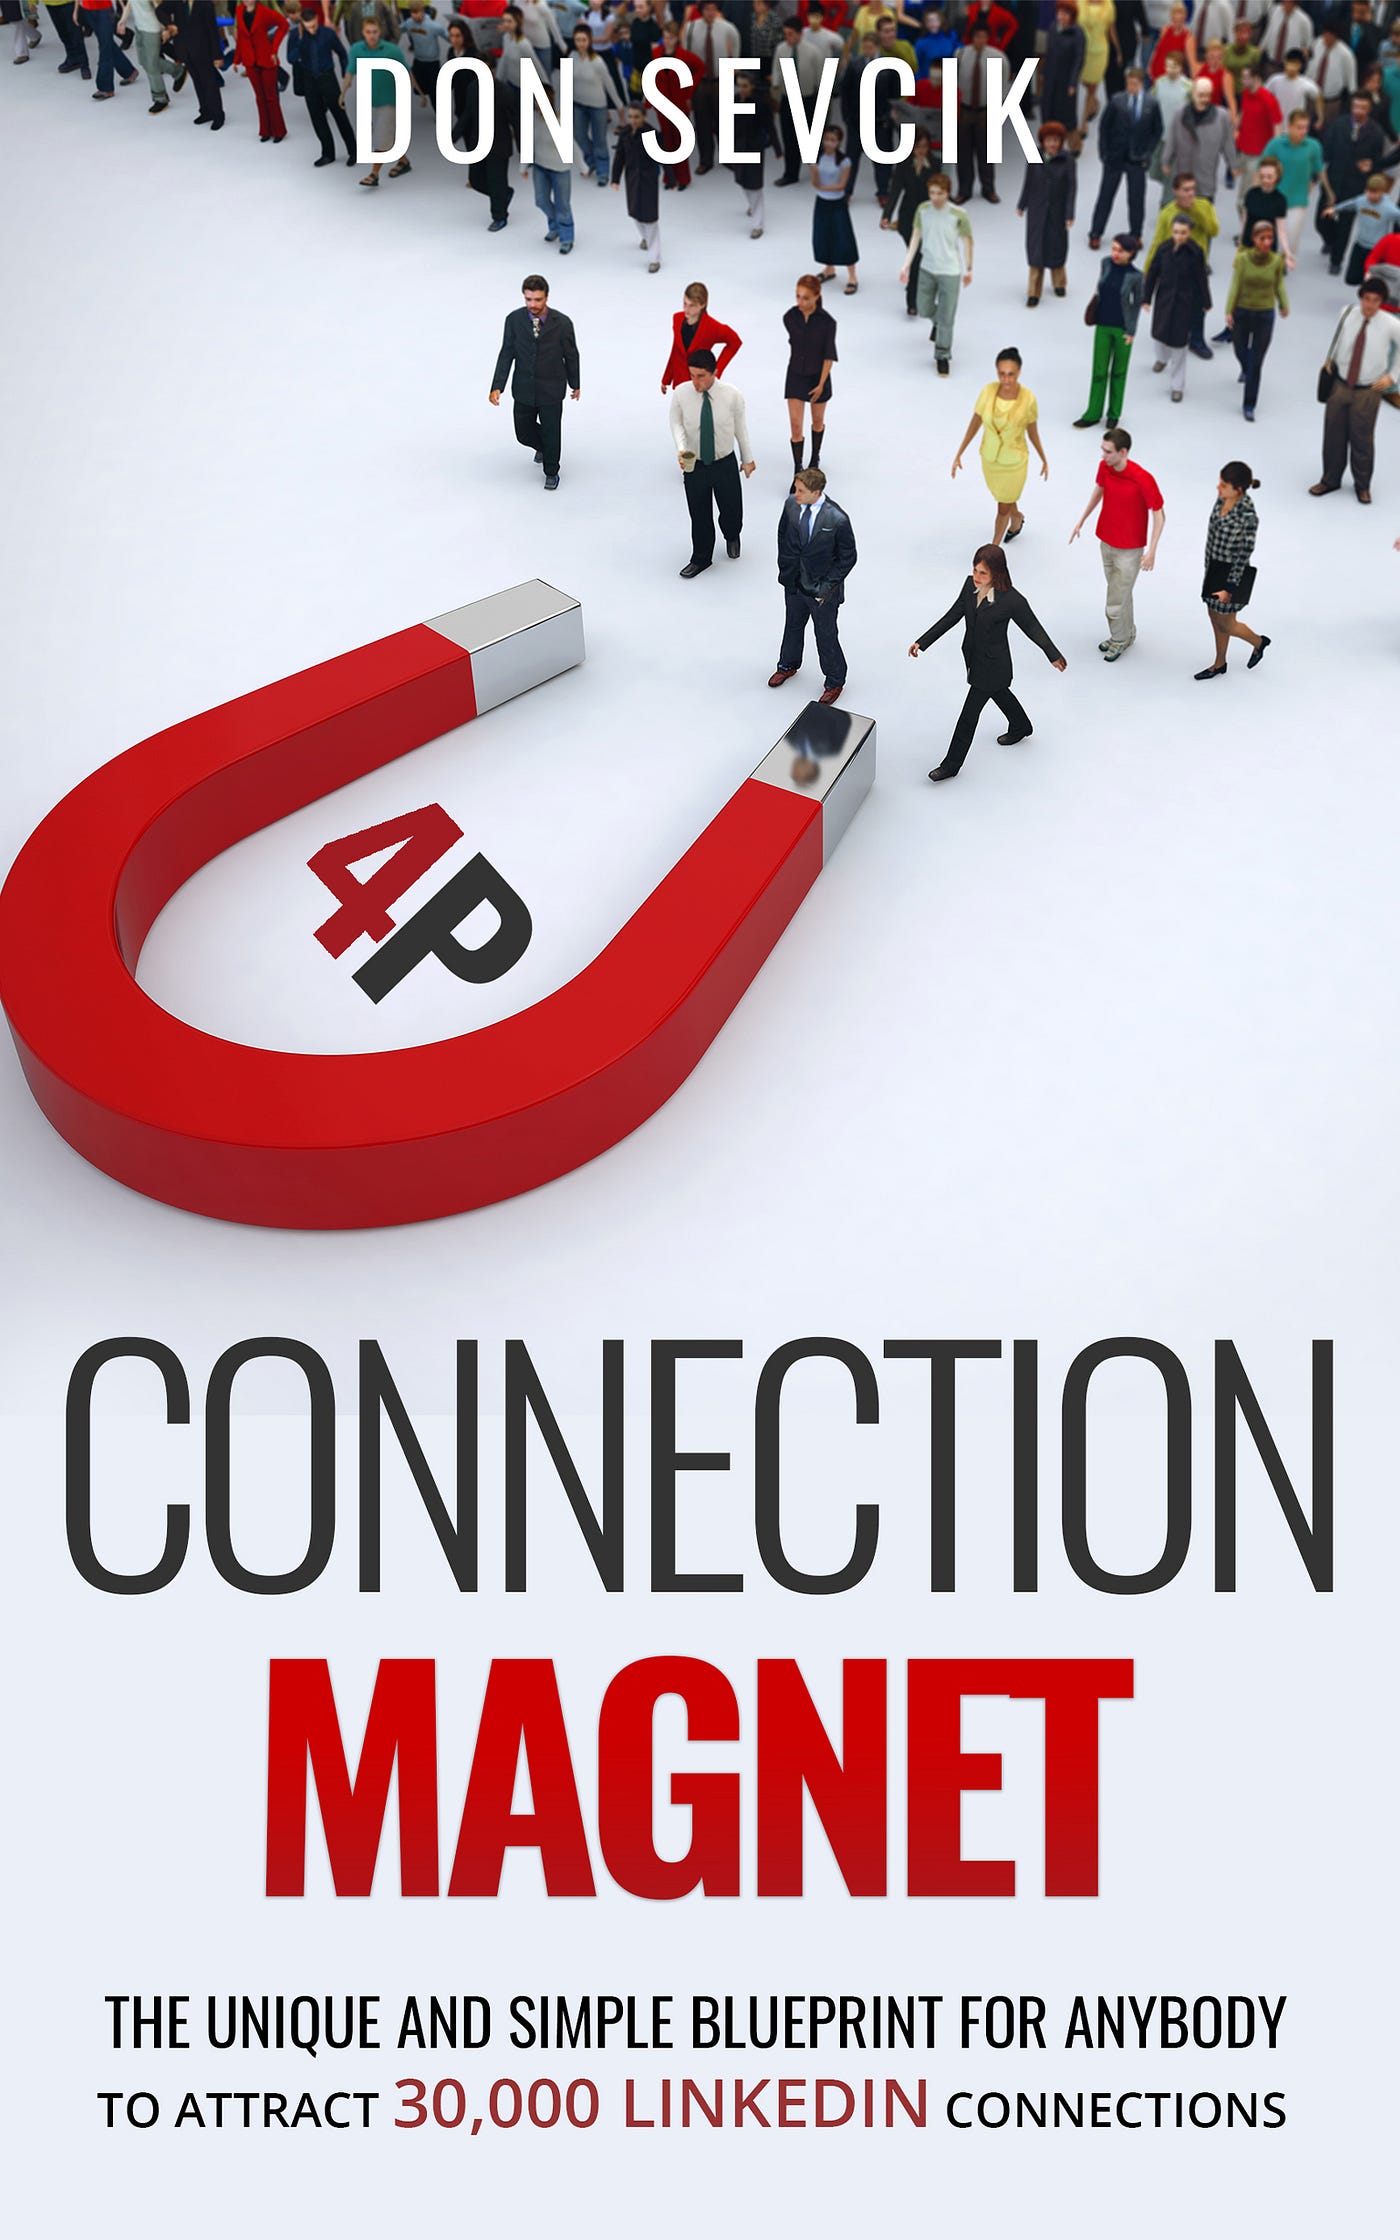 Connection Magnet The Unique and Simple Blueprint For Anybody to Attract 30,000 LinkedIn Connections by Don Sevcik Better Marketing image